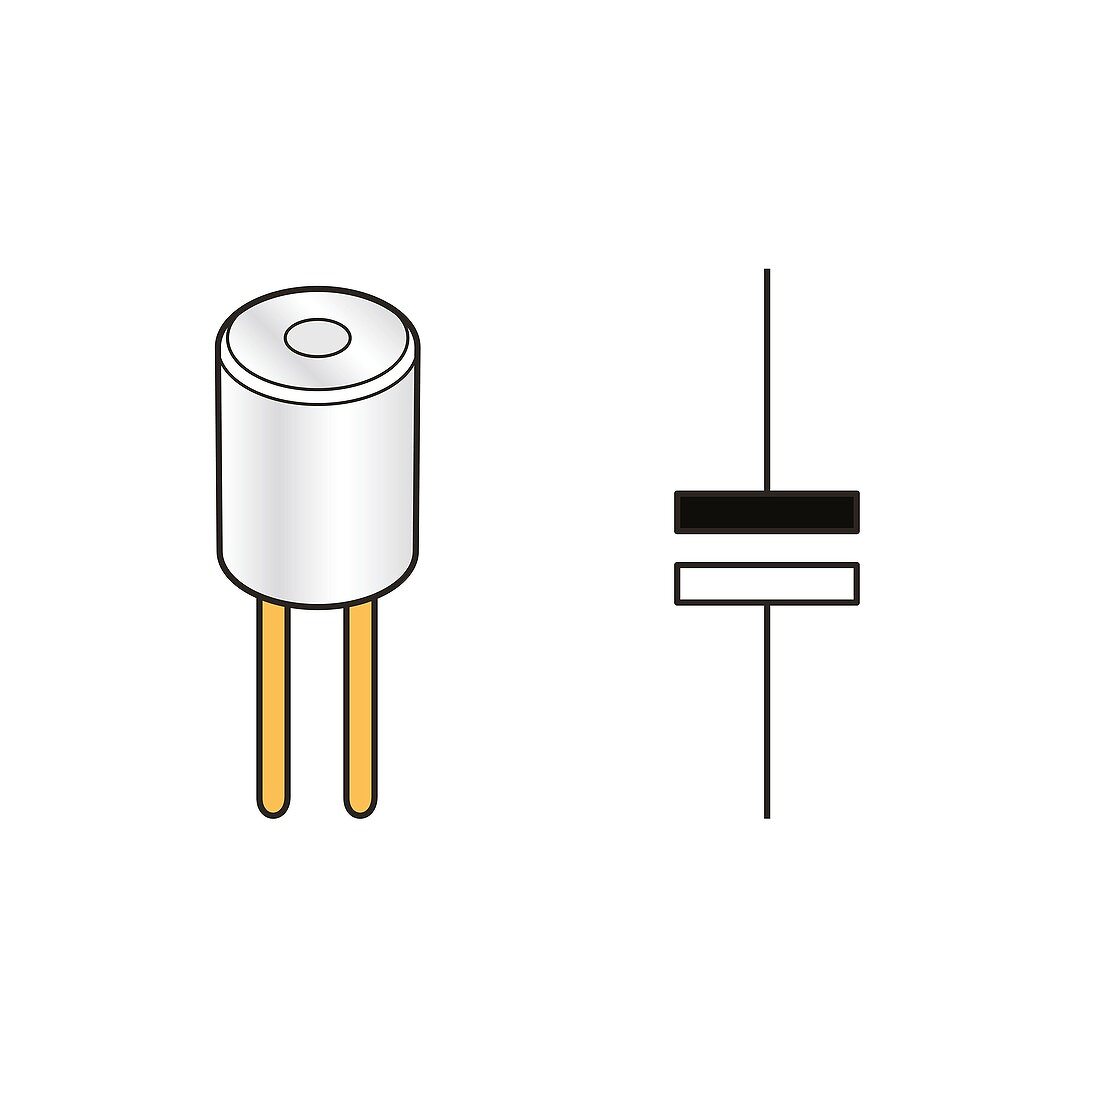 Electrolytic capacitor and circuit symbol, illustration